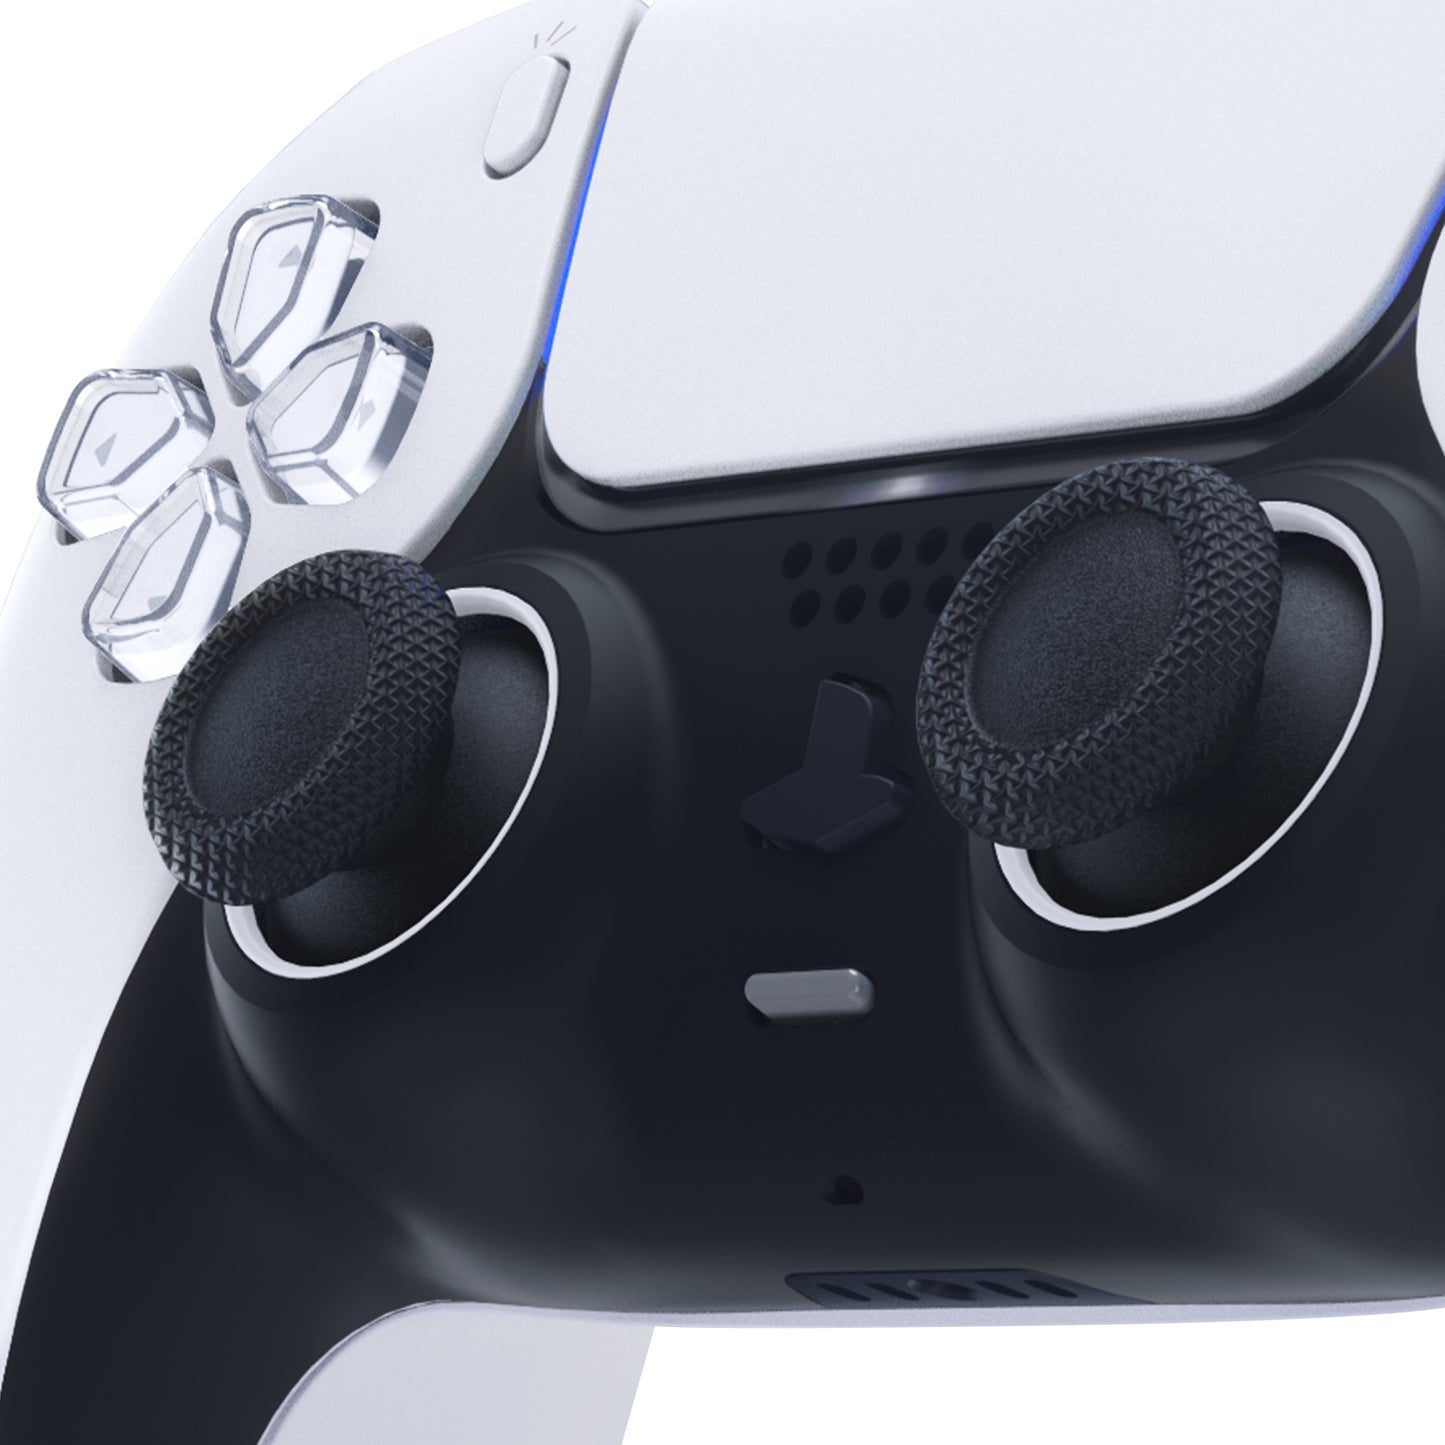 eXtremeRate Custom Replacement Accent Rings for PS5 Controller - Original White eXtremeRate